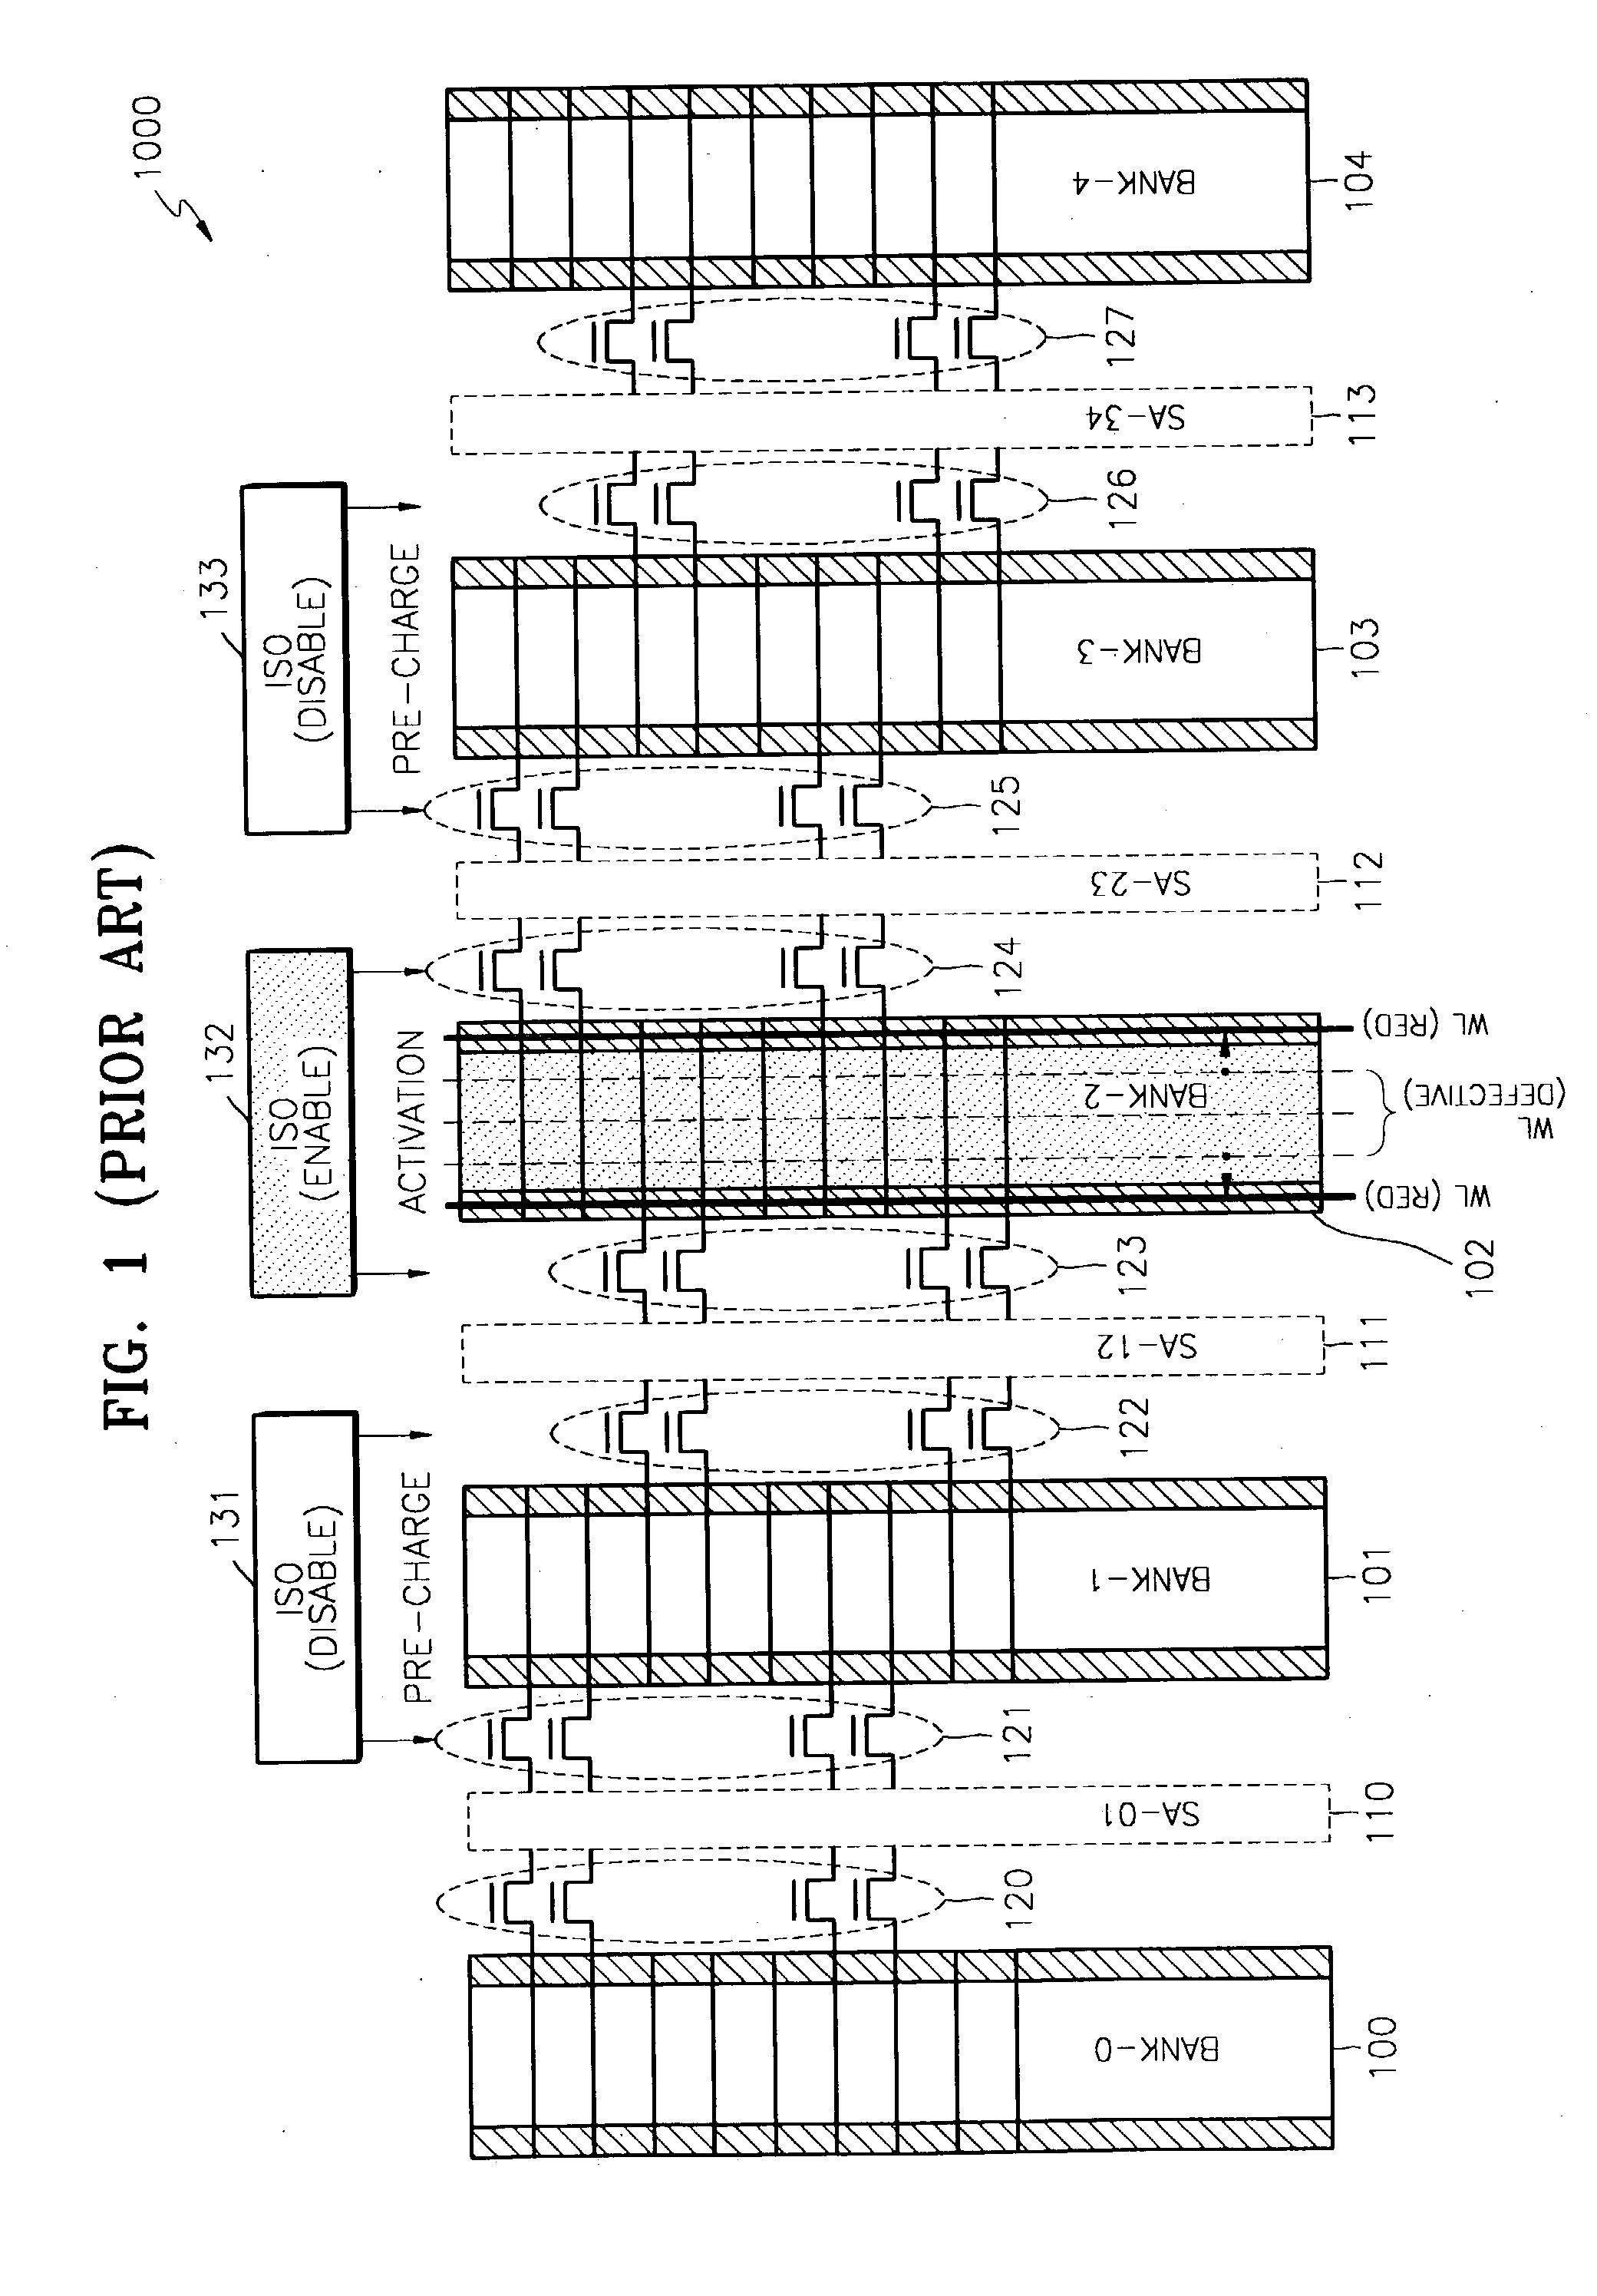 Semiconductor memory device having improved replacement efficiency of defective word lines by redundancy word lines